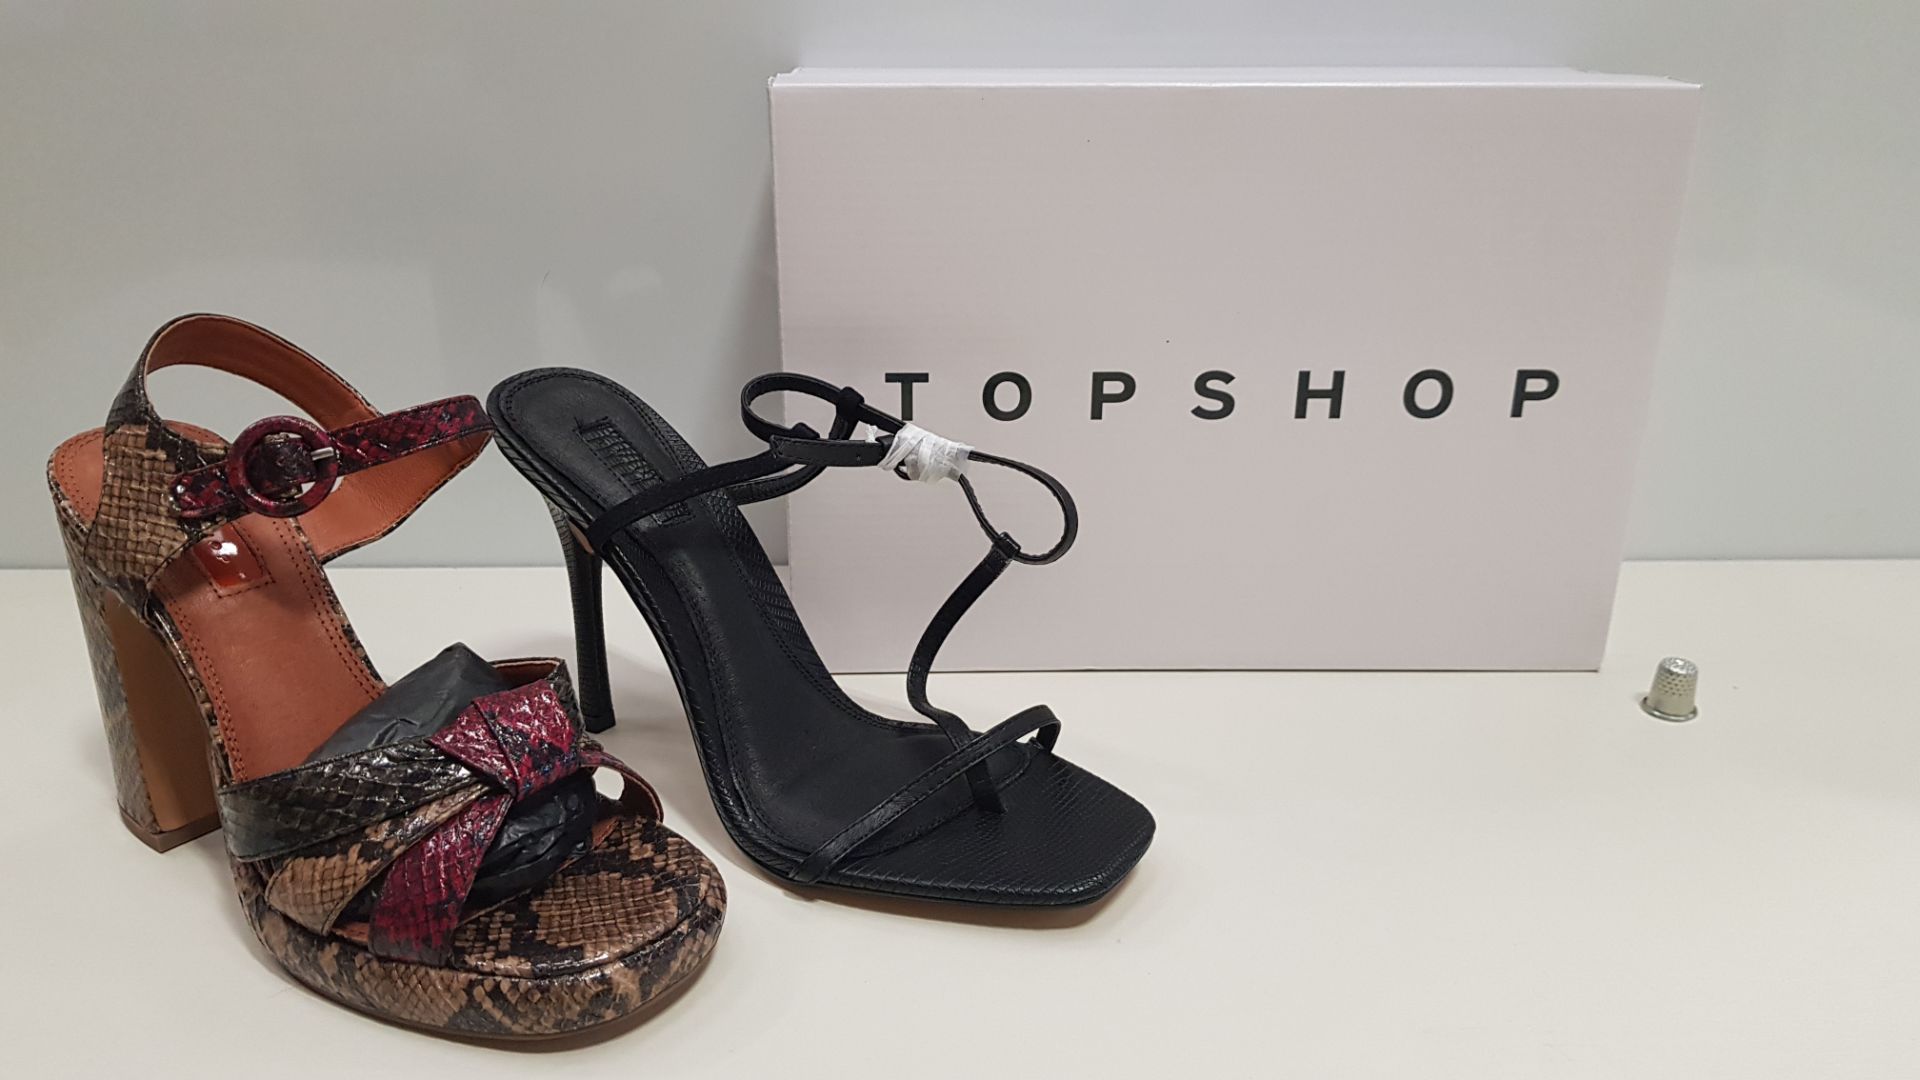 15 X BRAND NEW TOPSHOP SHOES - 5 X BRAND NEW NATURAL RIPPLE HEELS UK SIZE 5 RRP £49.00 AND 10 X